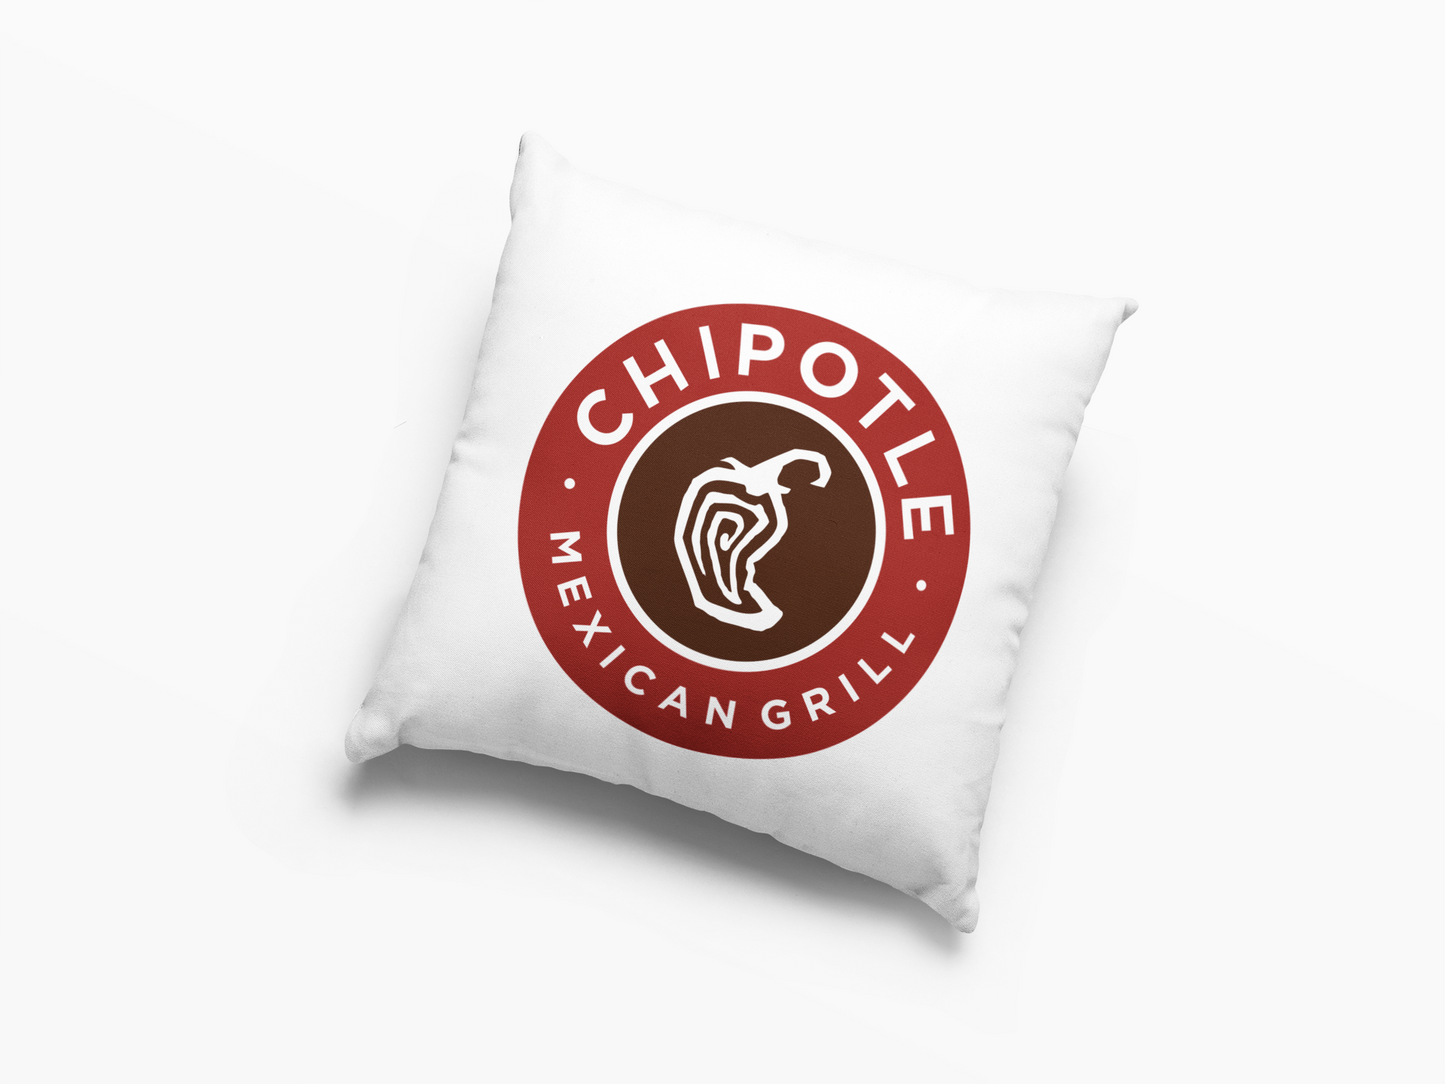 Chipotle Mexican Grill Cushion Case / Pillow Case